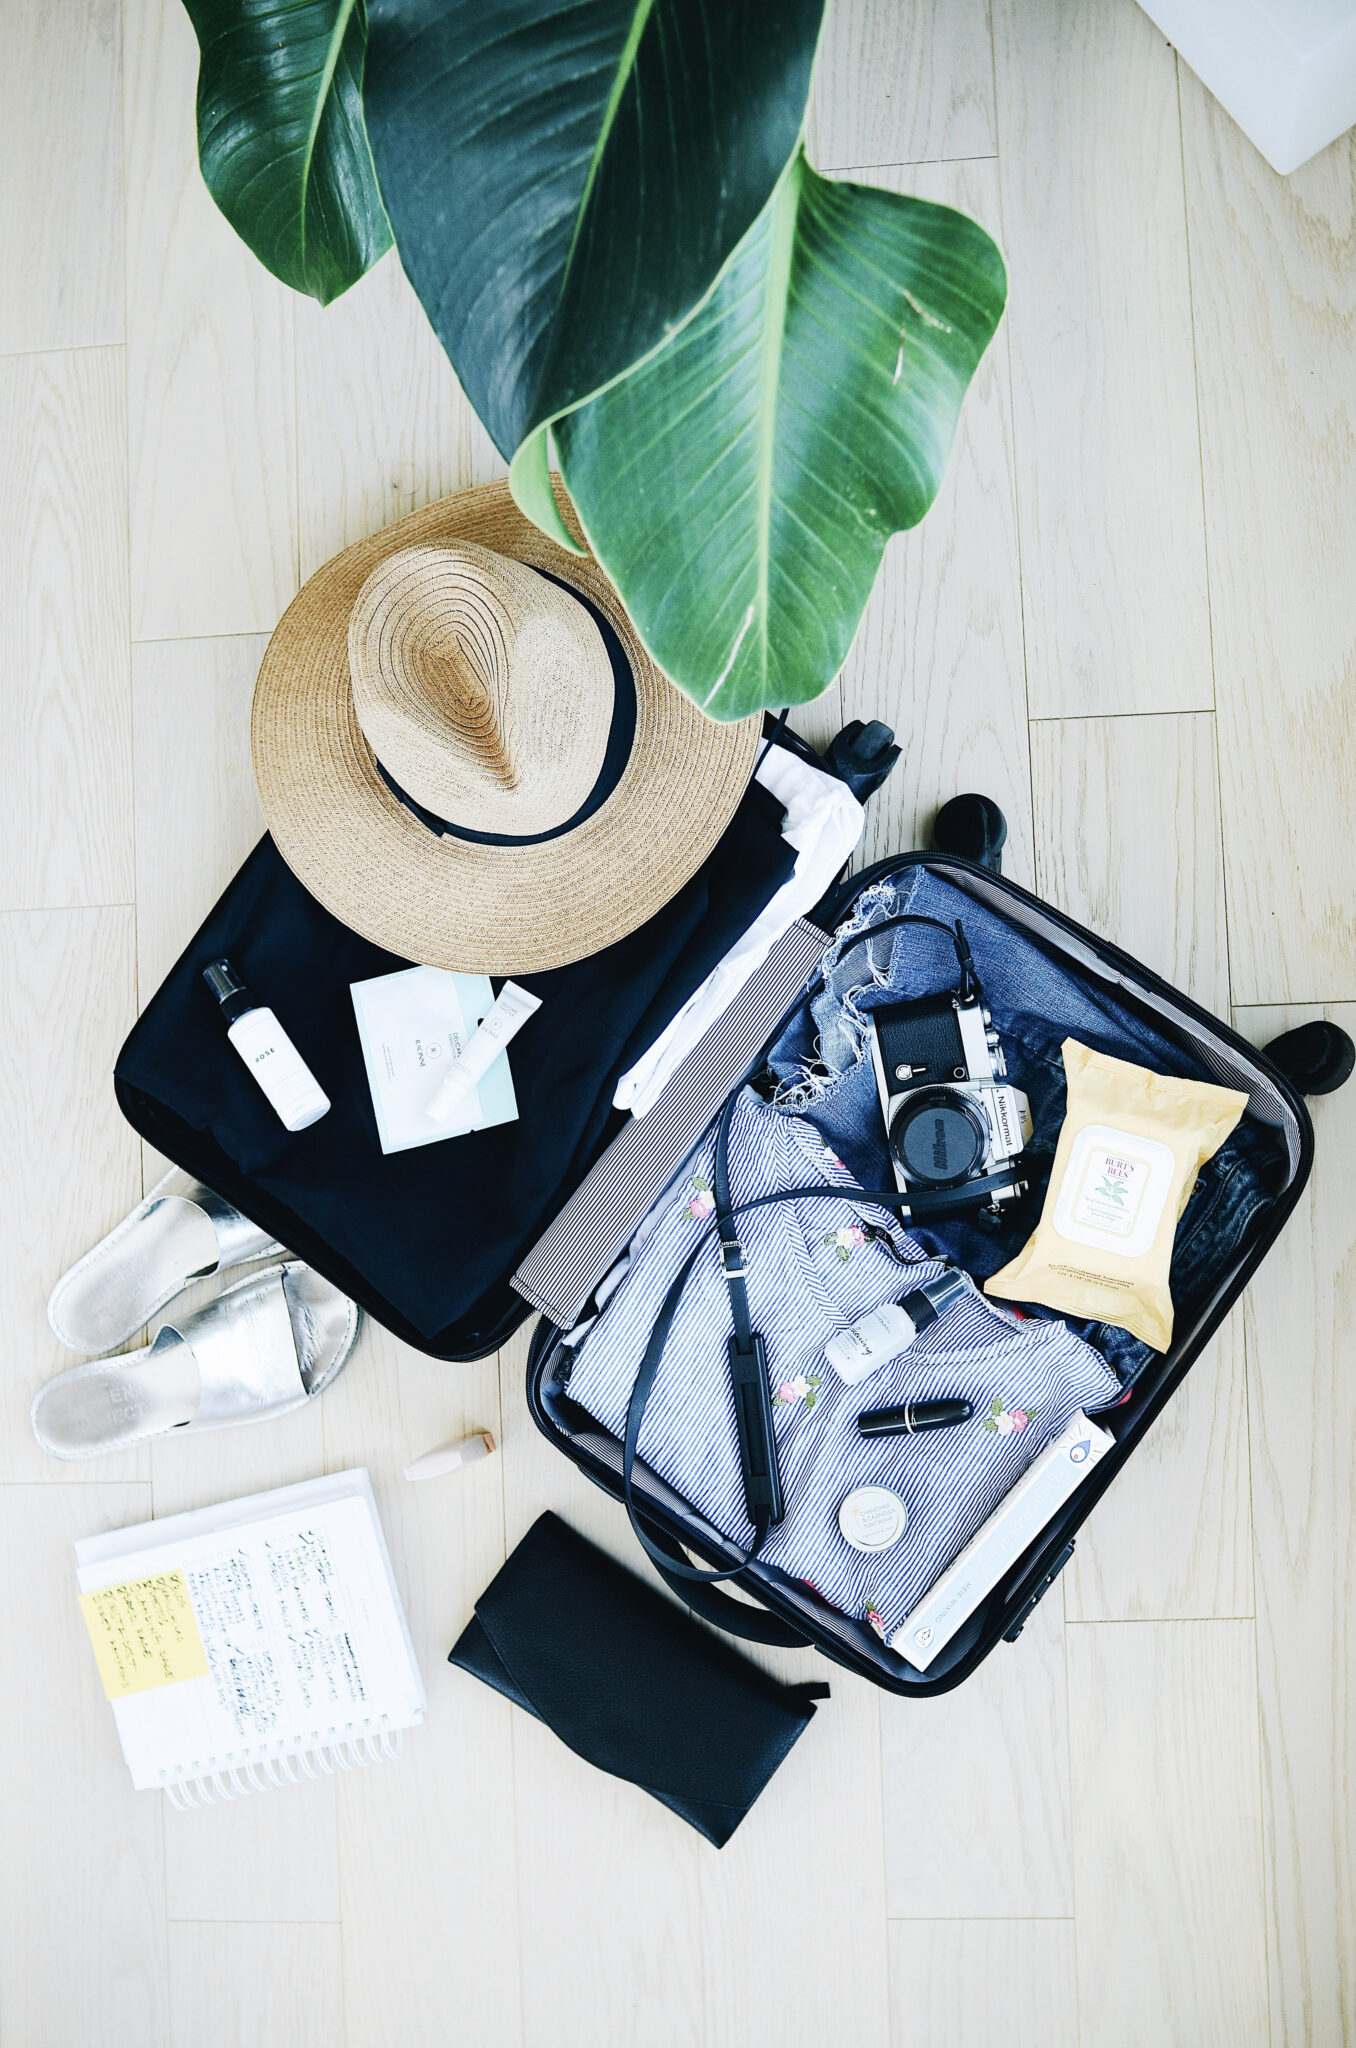 A flat lay shot of an open luggage with clothes, shoes, accessories, and more for a vacation. This articles covers packing tips and tricks for vacation.